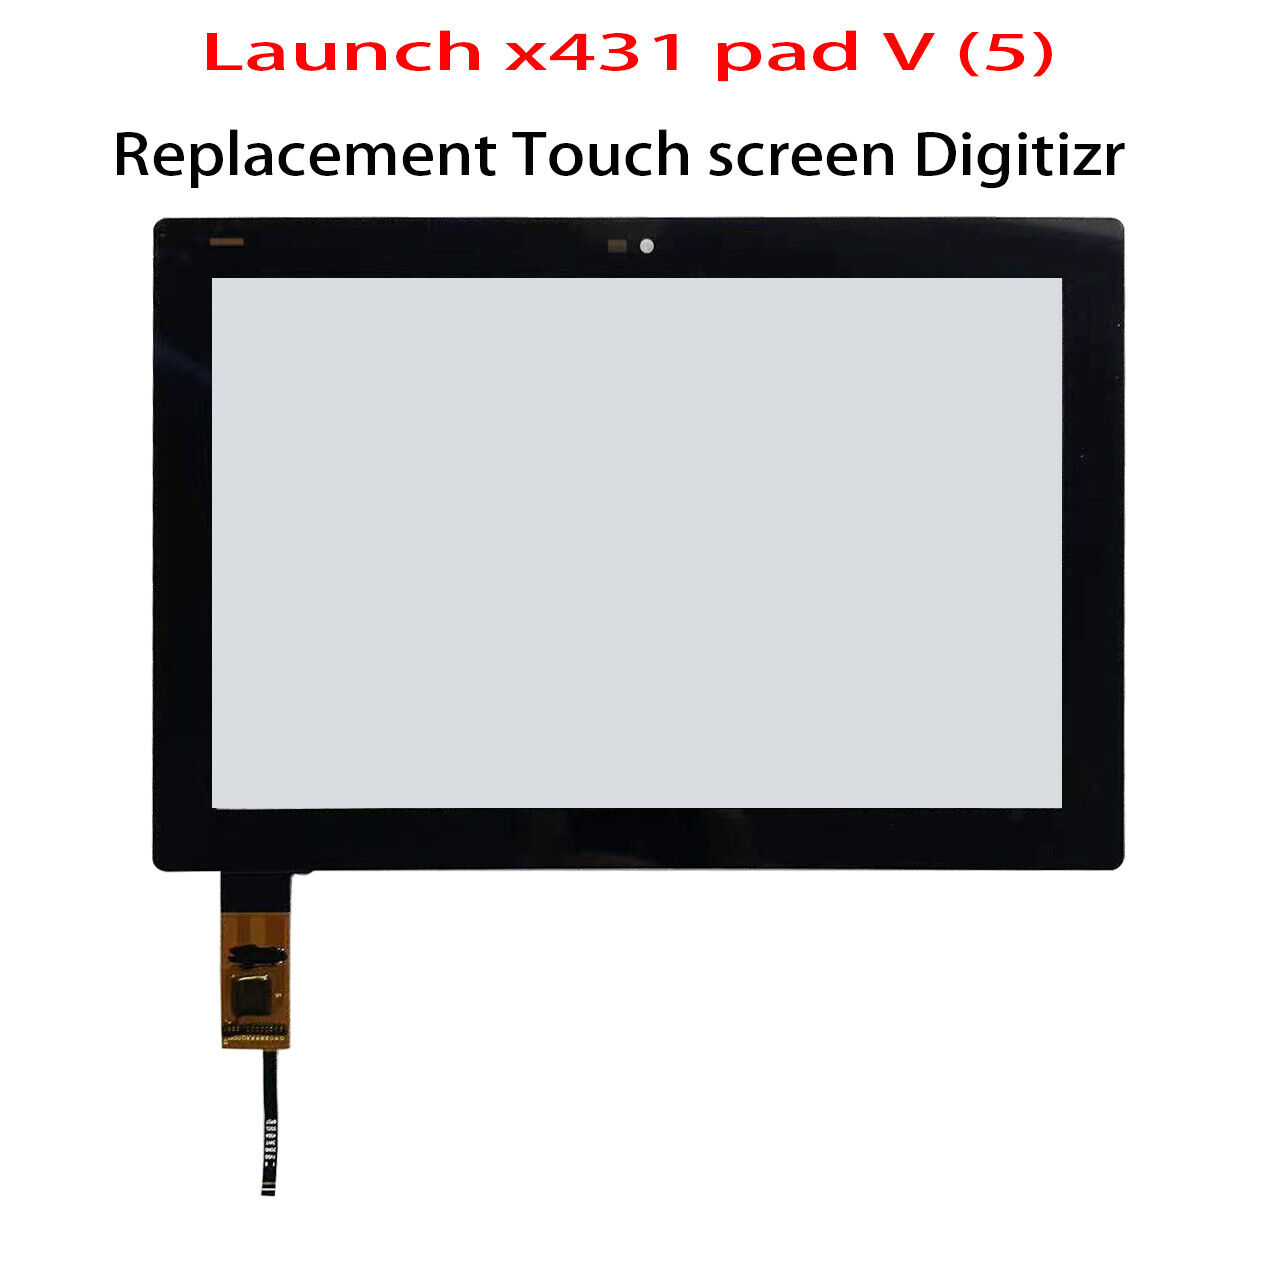 New Replacement Touch panel For Launch x431 pad V (5) Touch Screen Digtizer